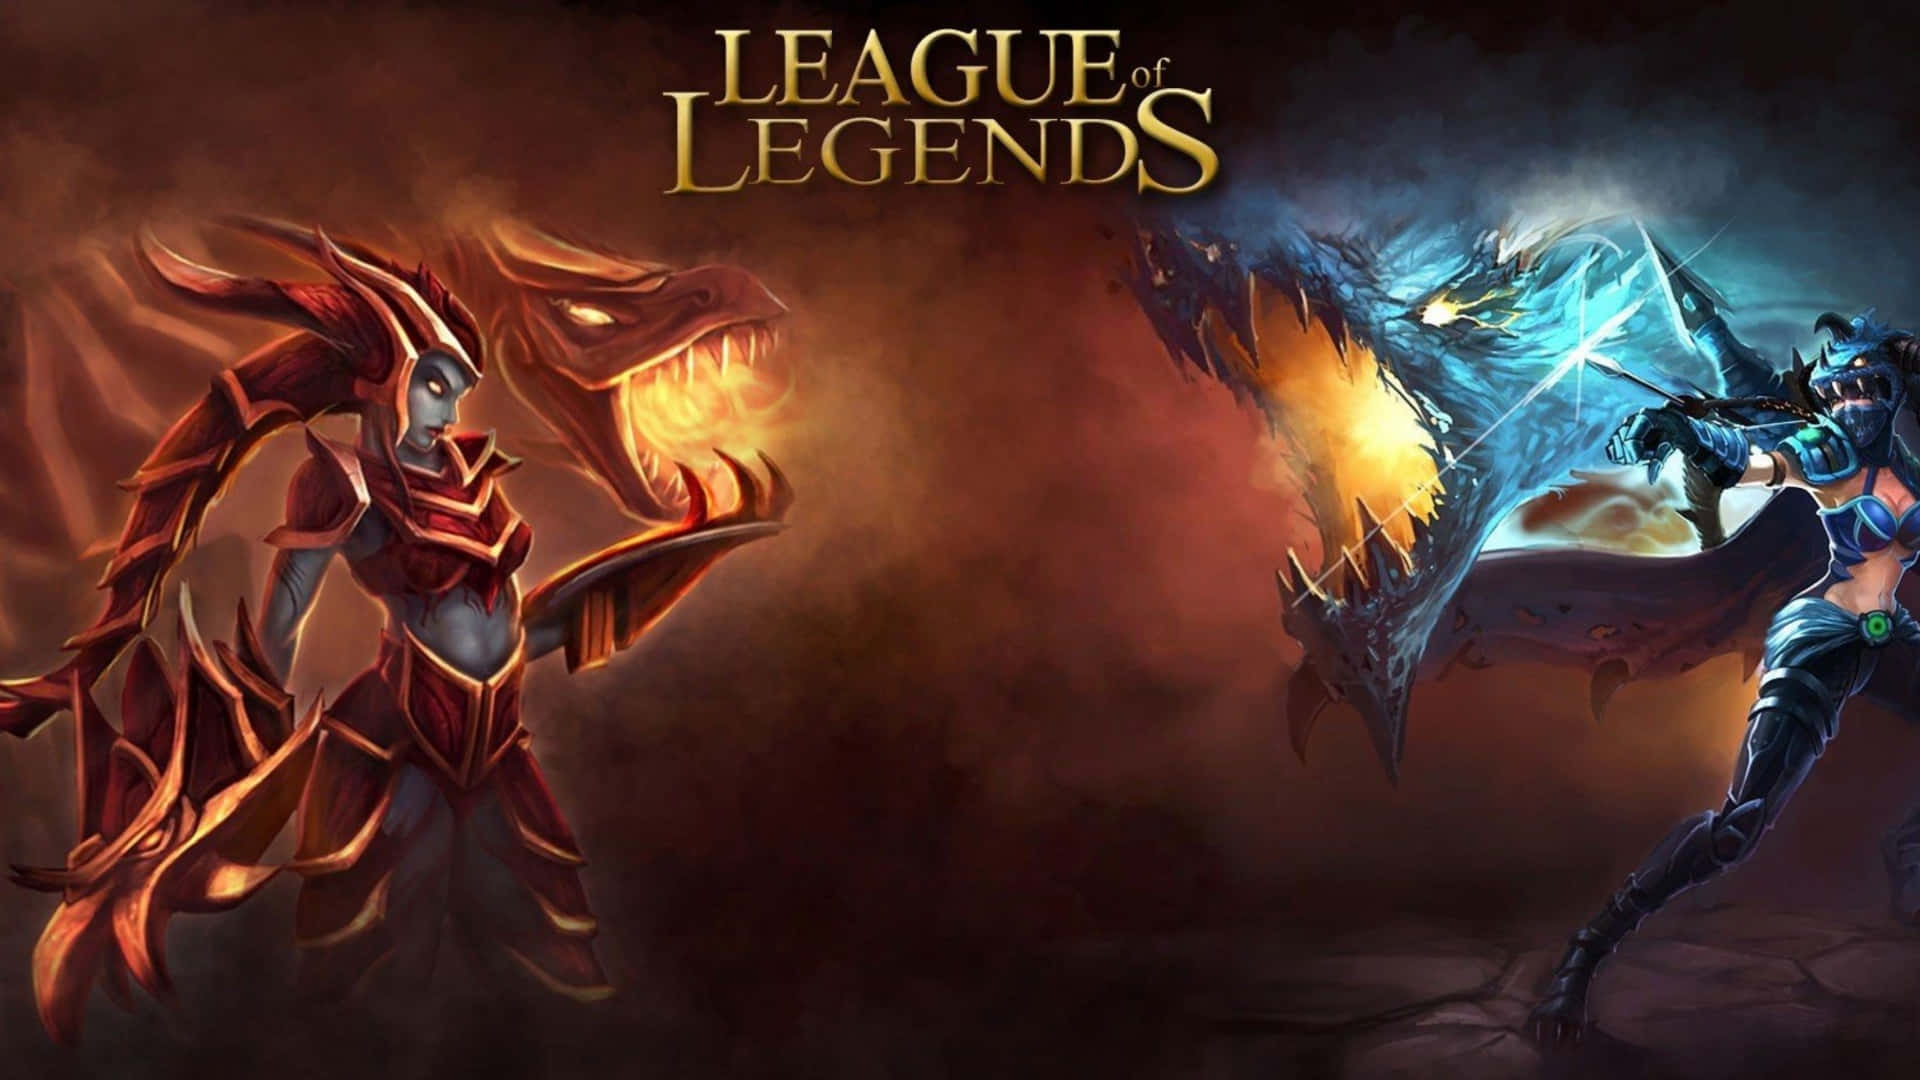 Show your skill in League of Legends!